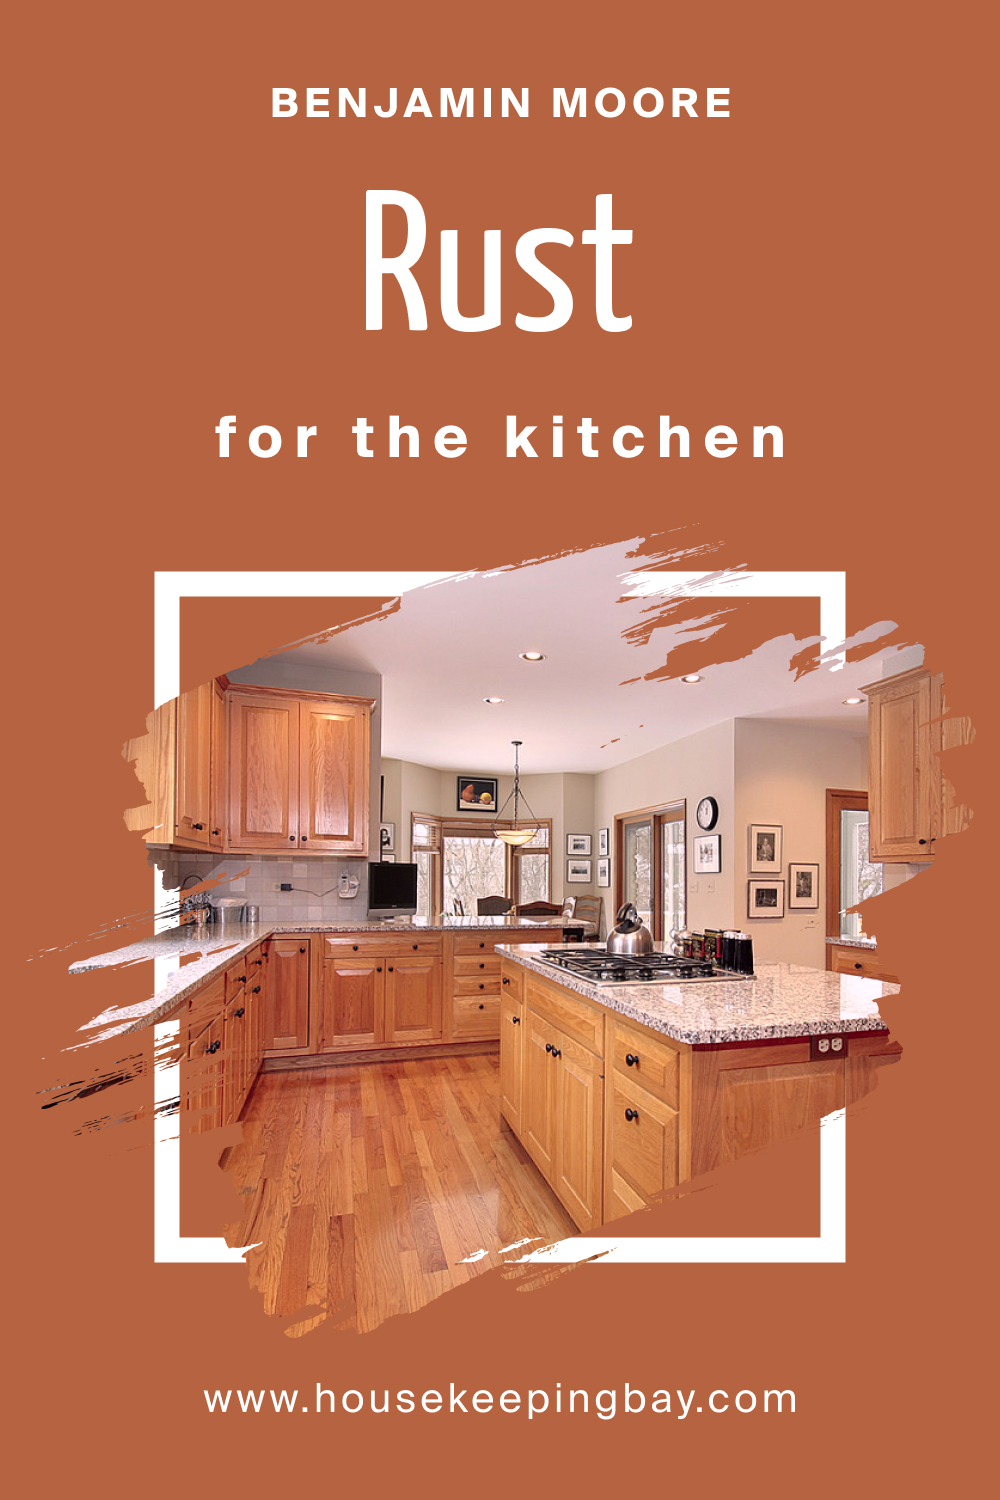 How to Use BM Rust 2175-30 in the Kitchen?